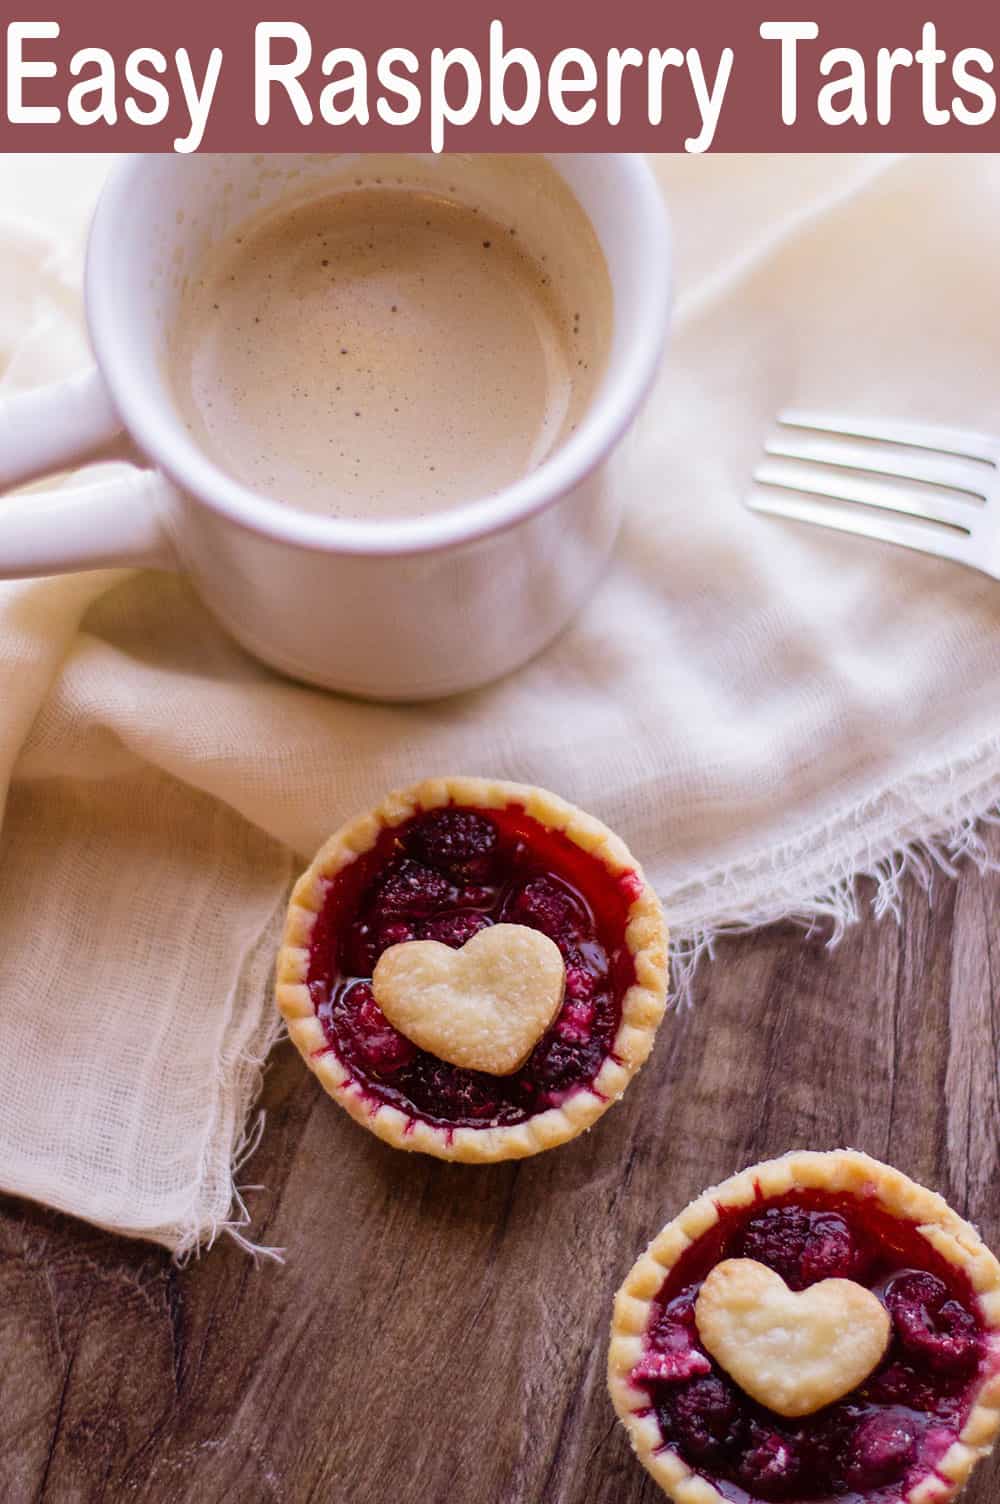 Easy Raspberry Tarts | Simple & Delicious | All She Cooks